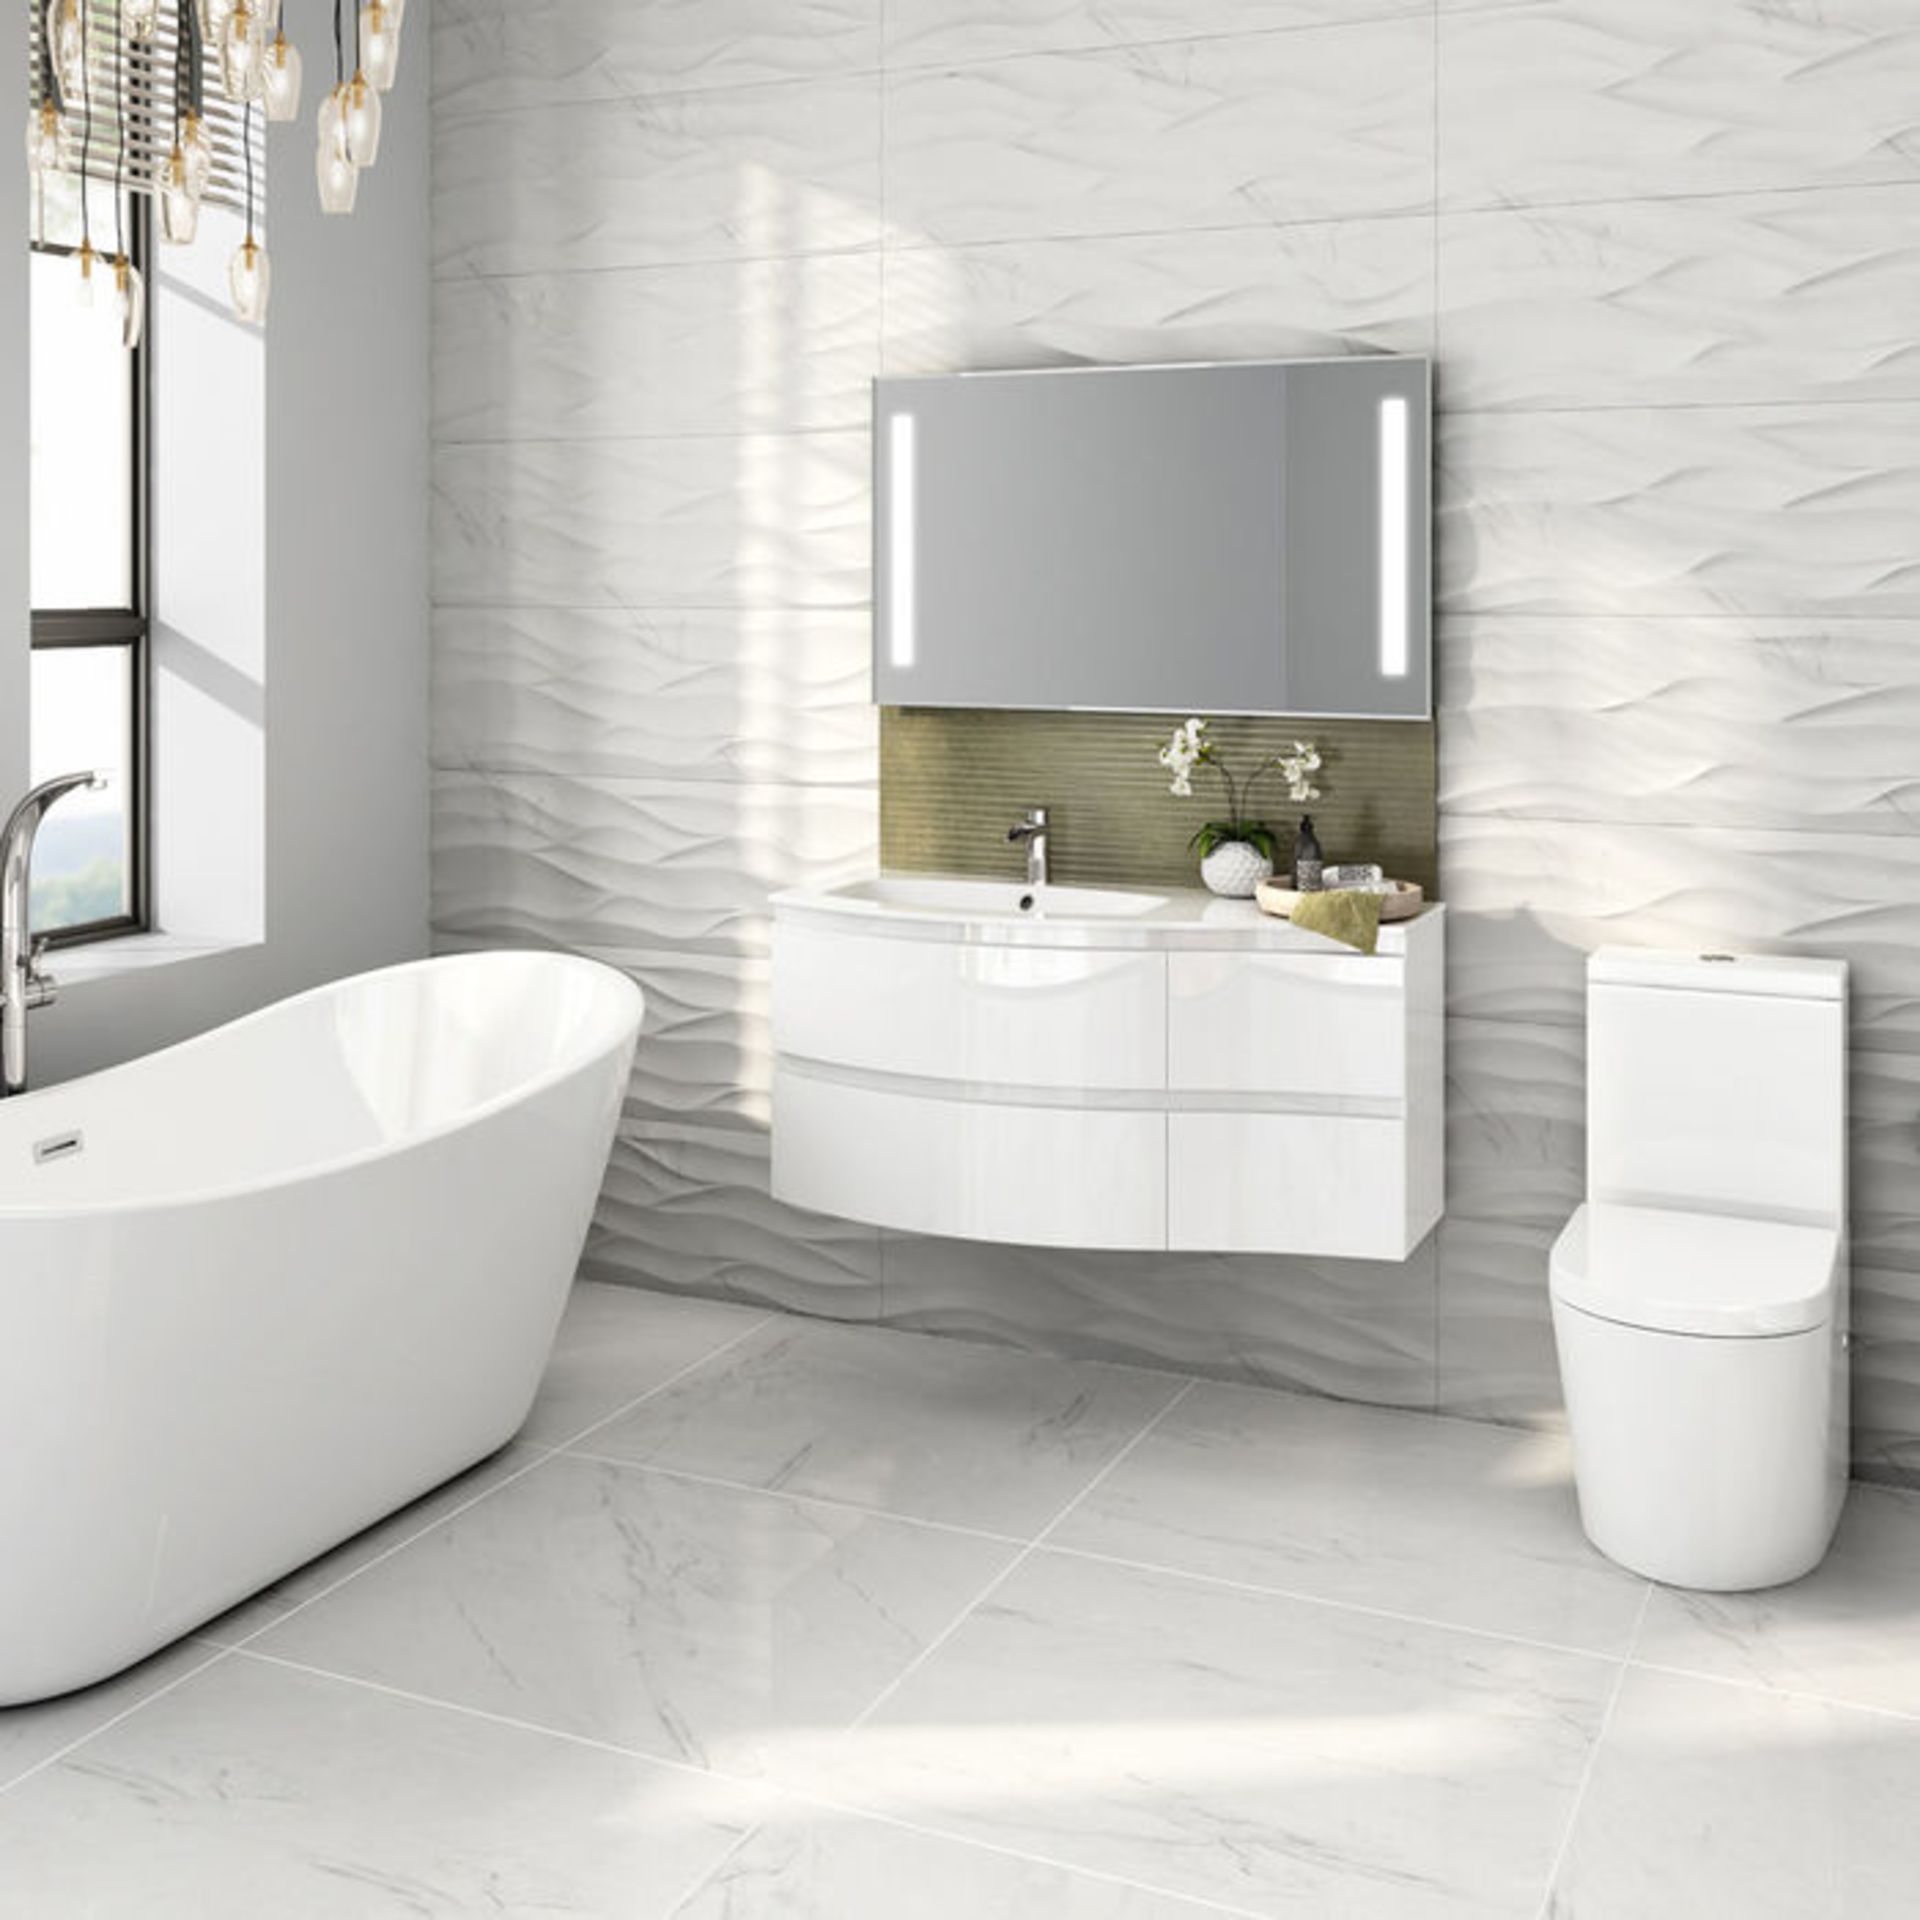 (AH4) 1040mm Amelie High Gloss White Curved Vanity Unit - Left Hand - Wall Hung. This premium option - Image 2 of 4